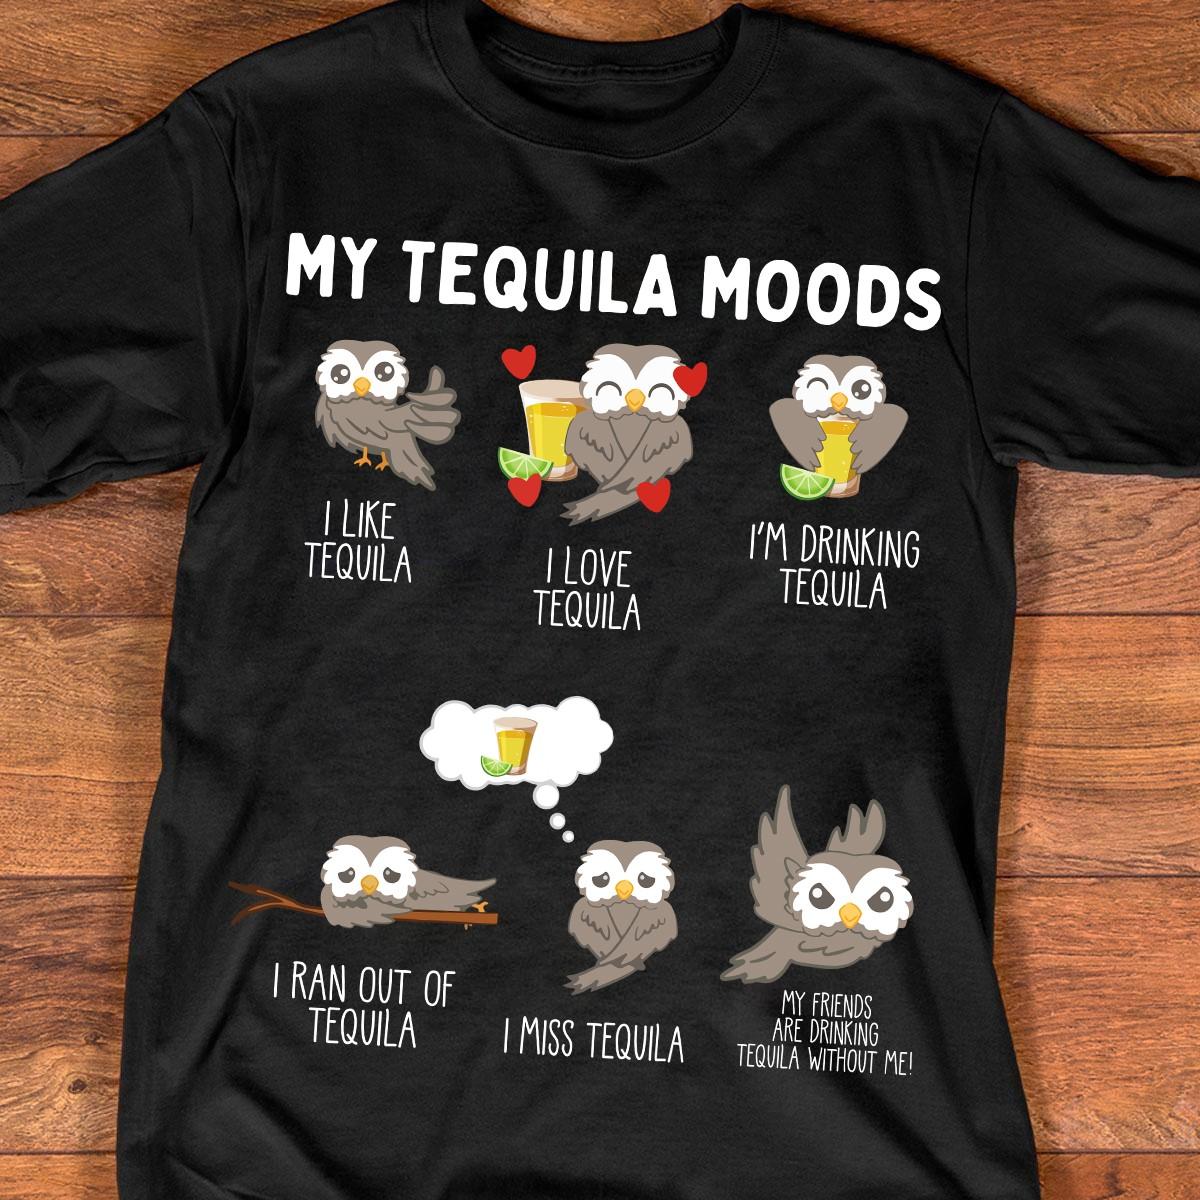 My tequila mood - Like Tequilda, love Tequila, drinking Tequilda, ran out of Tequila